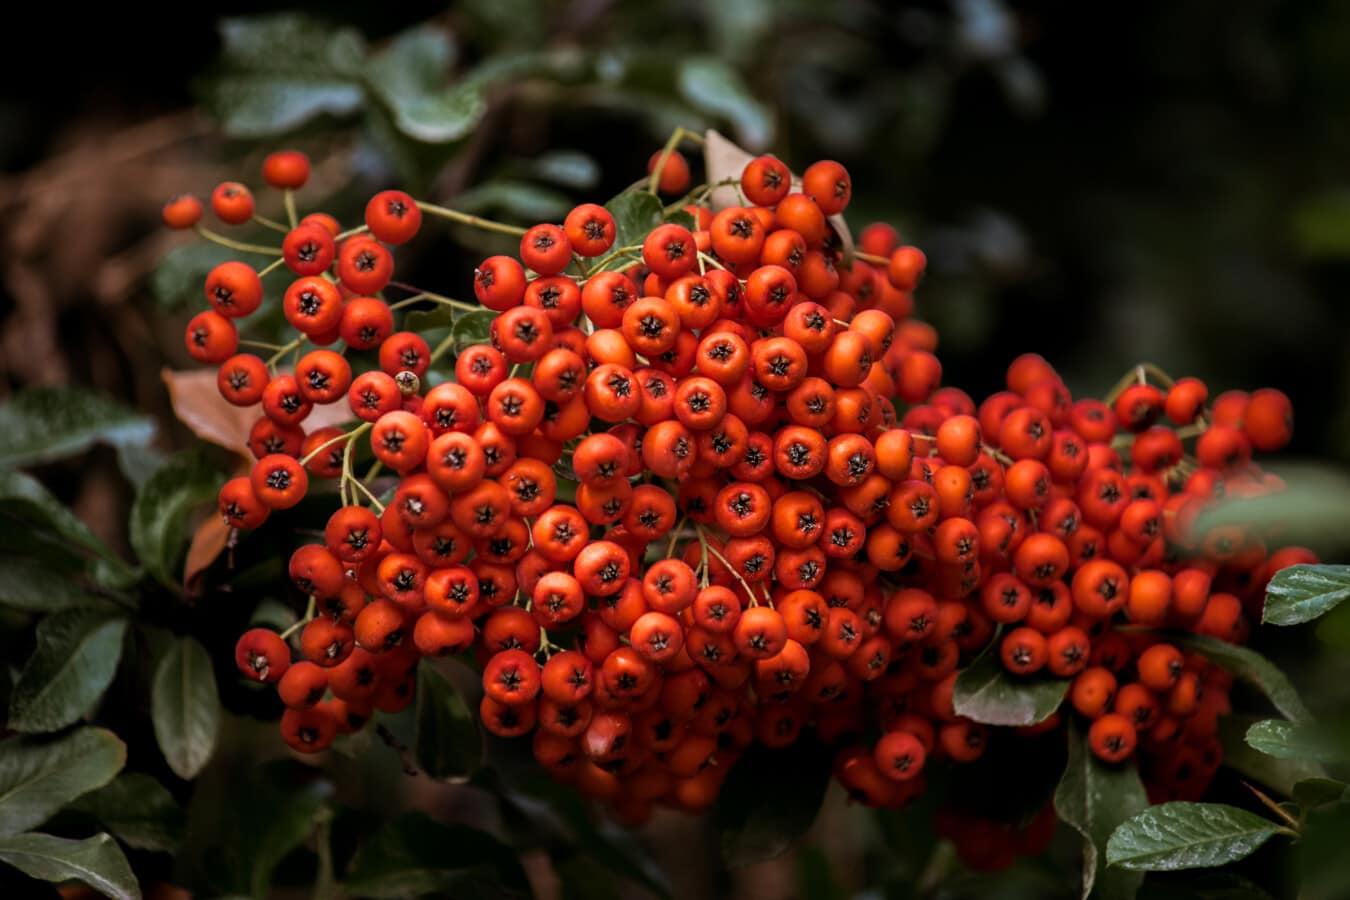 berries, orange yellow, cluster, many, bushes, branches, plant, leaf, nature, shrub